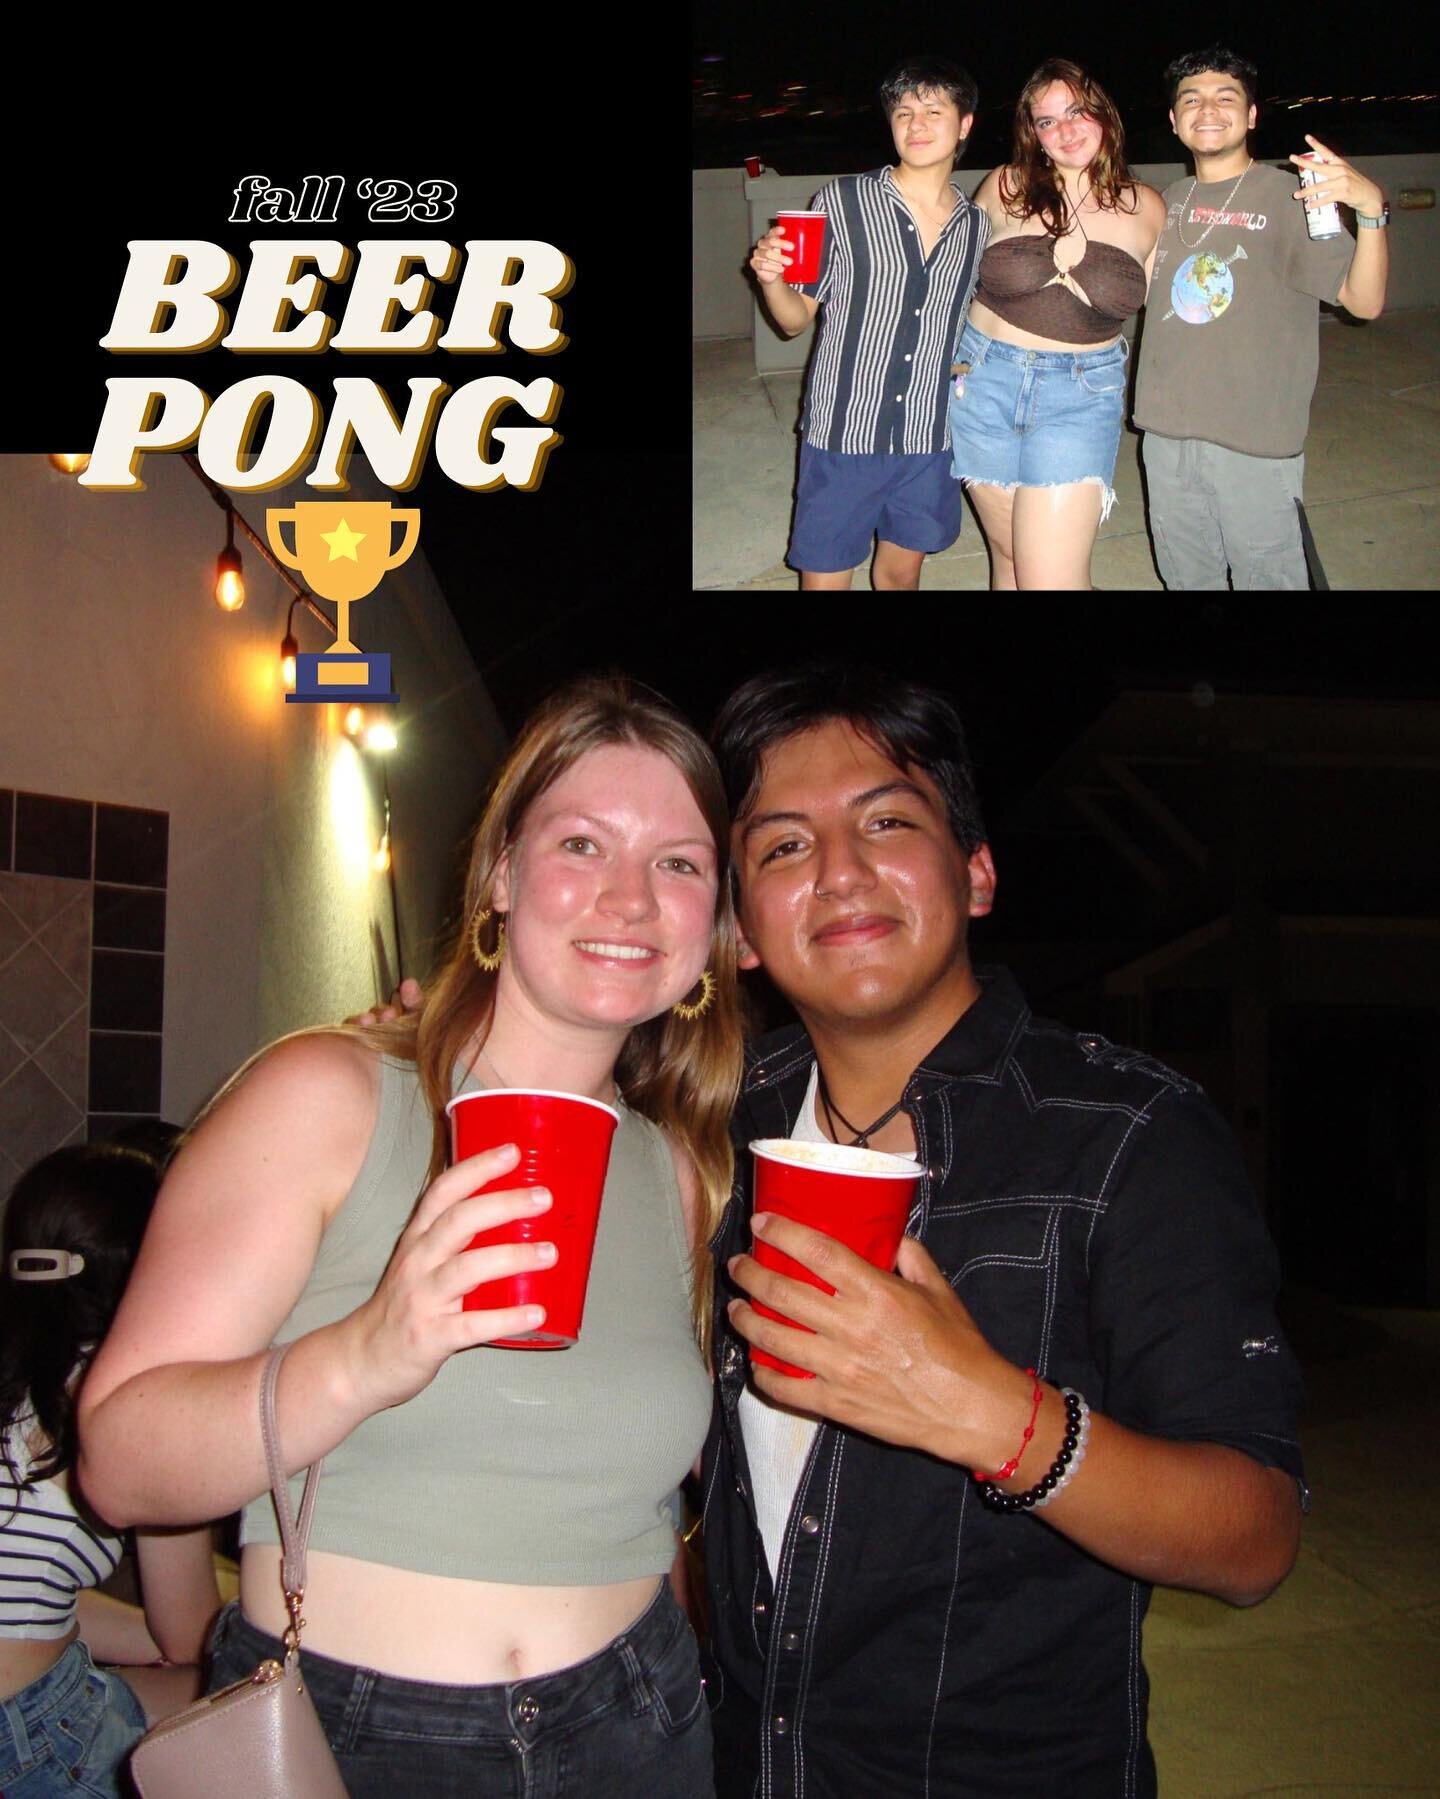 Beer pong was a blast! Special thanks to everyone for coming out and congrats to our winners🏆

REMINDERS:

Our last info session is Monday September 11th!
Applications are due Sunday September 17th!